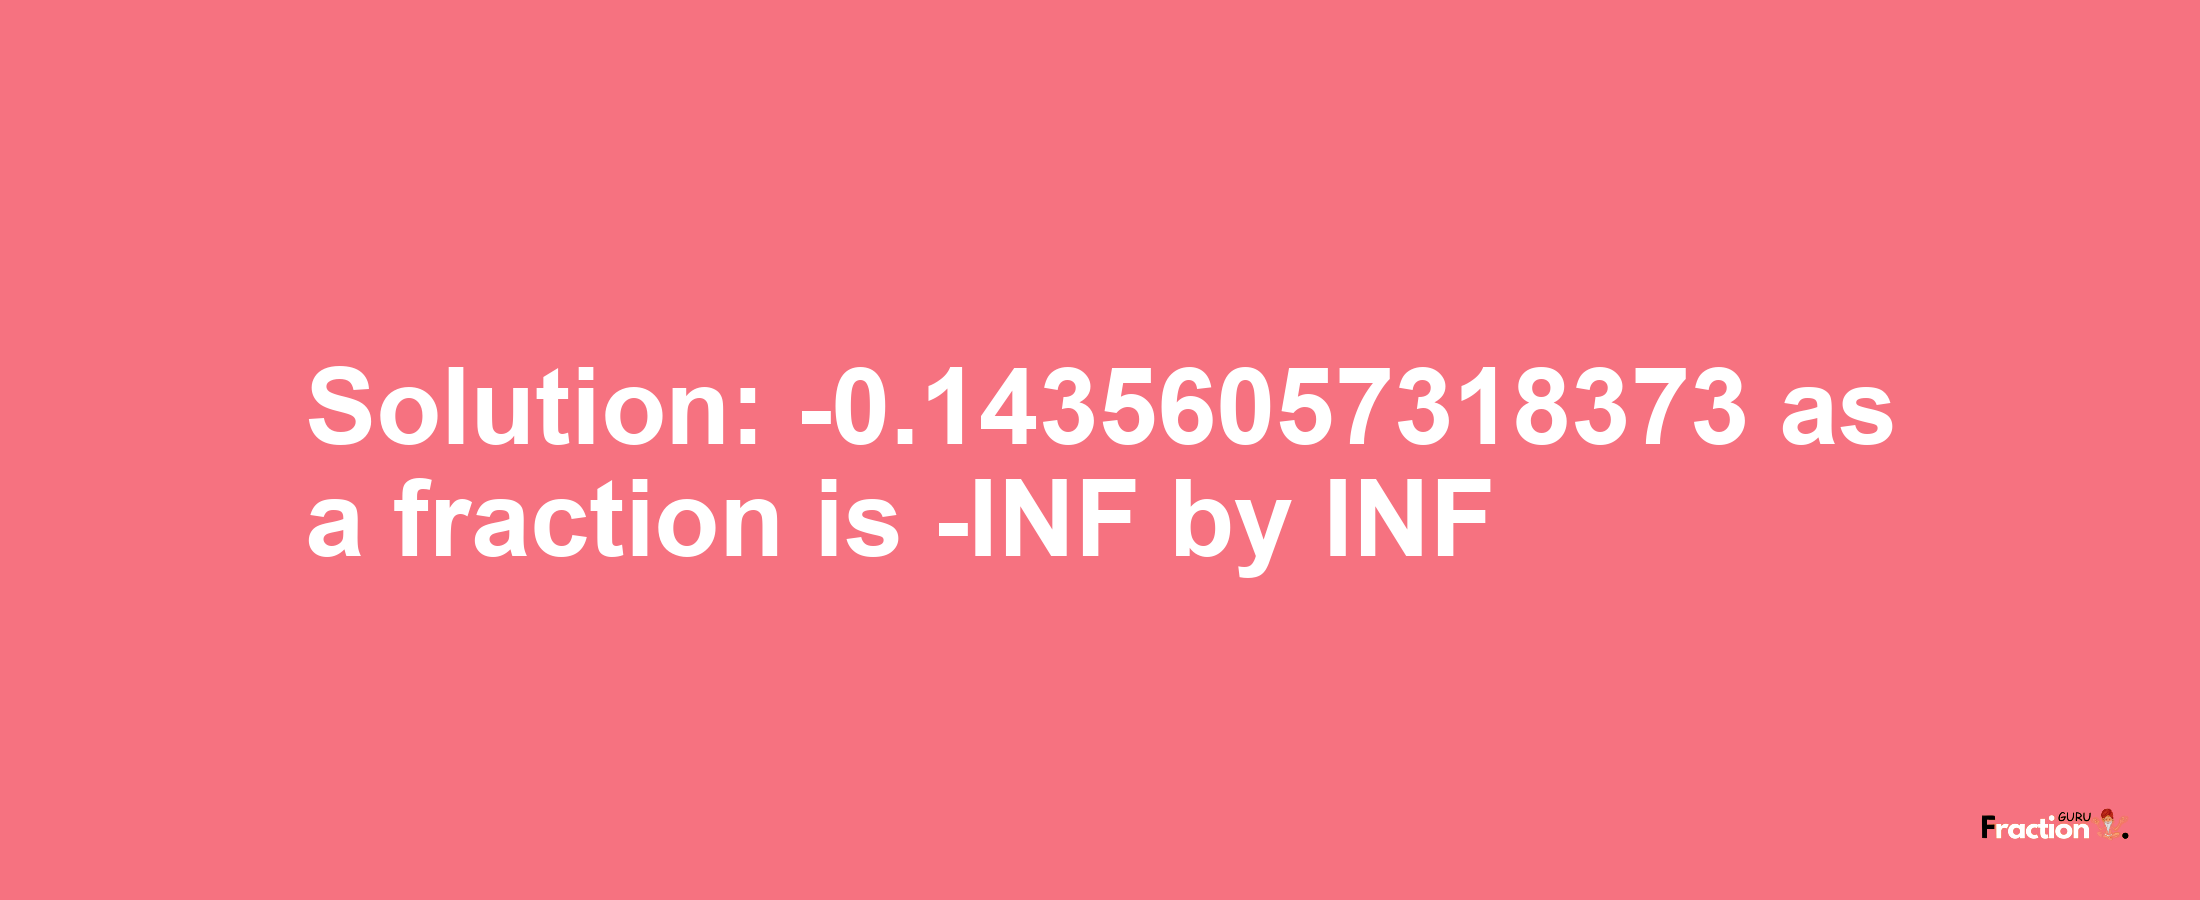 Solution:-0.14356057318373 as a fraction is -INF/INF